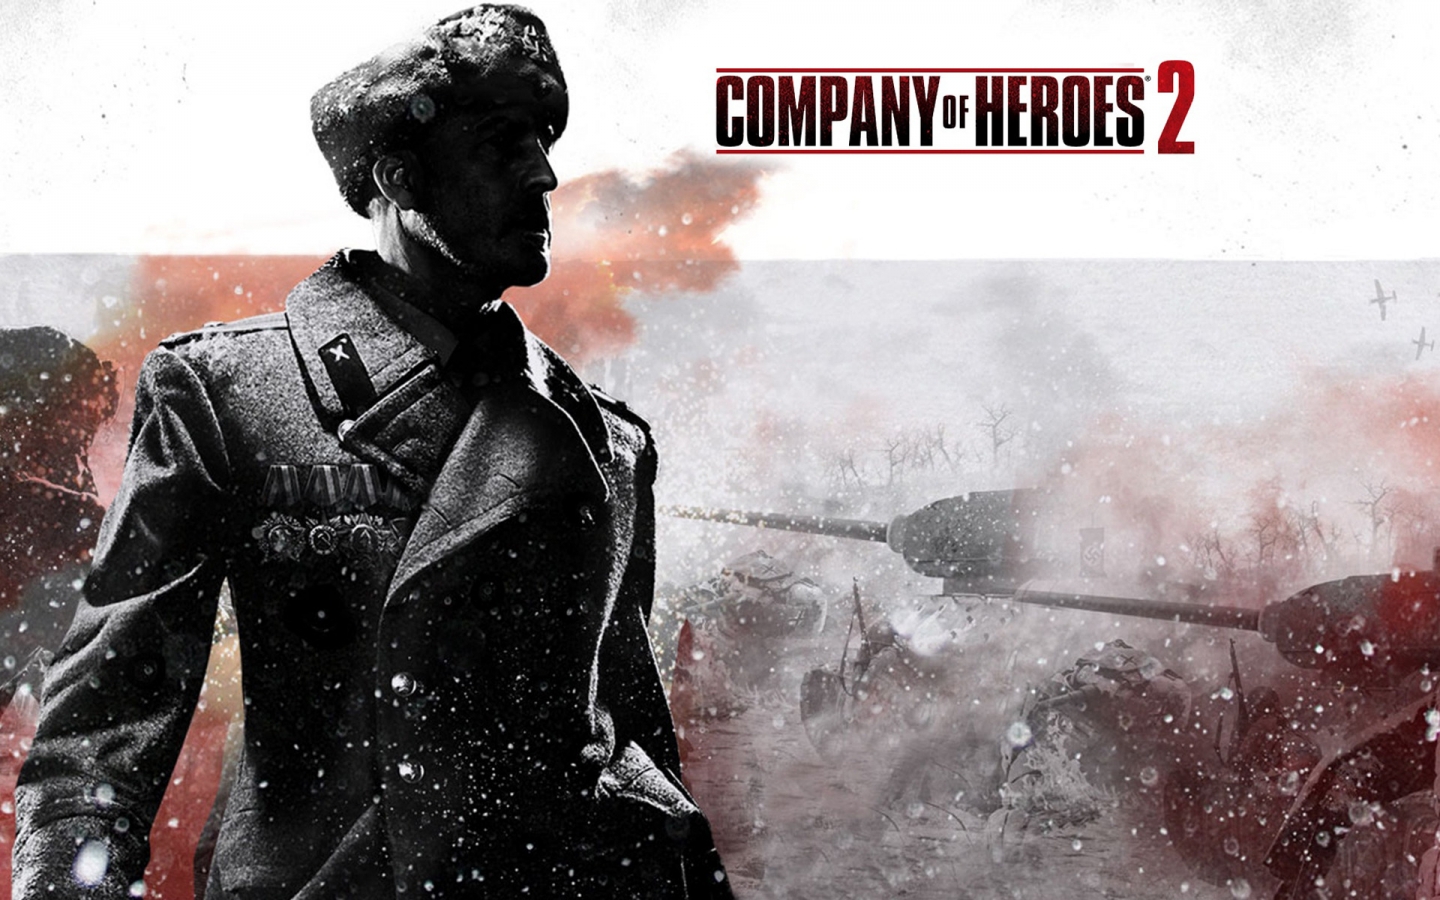 Company of Heroes 2 Character for 1440 x 900 widescreen resolution